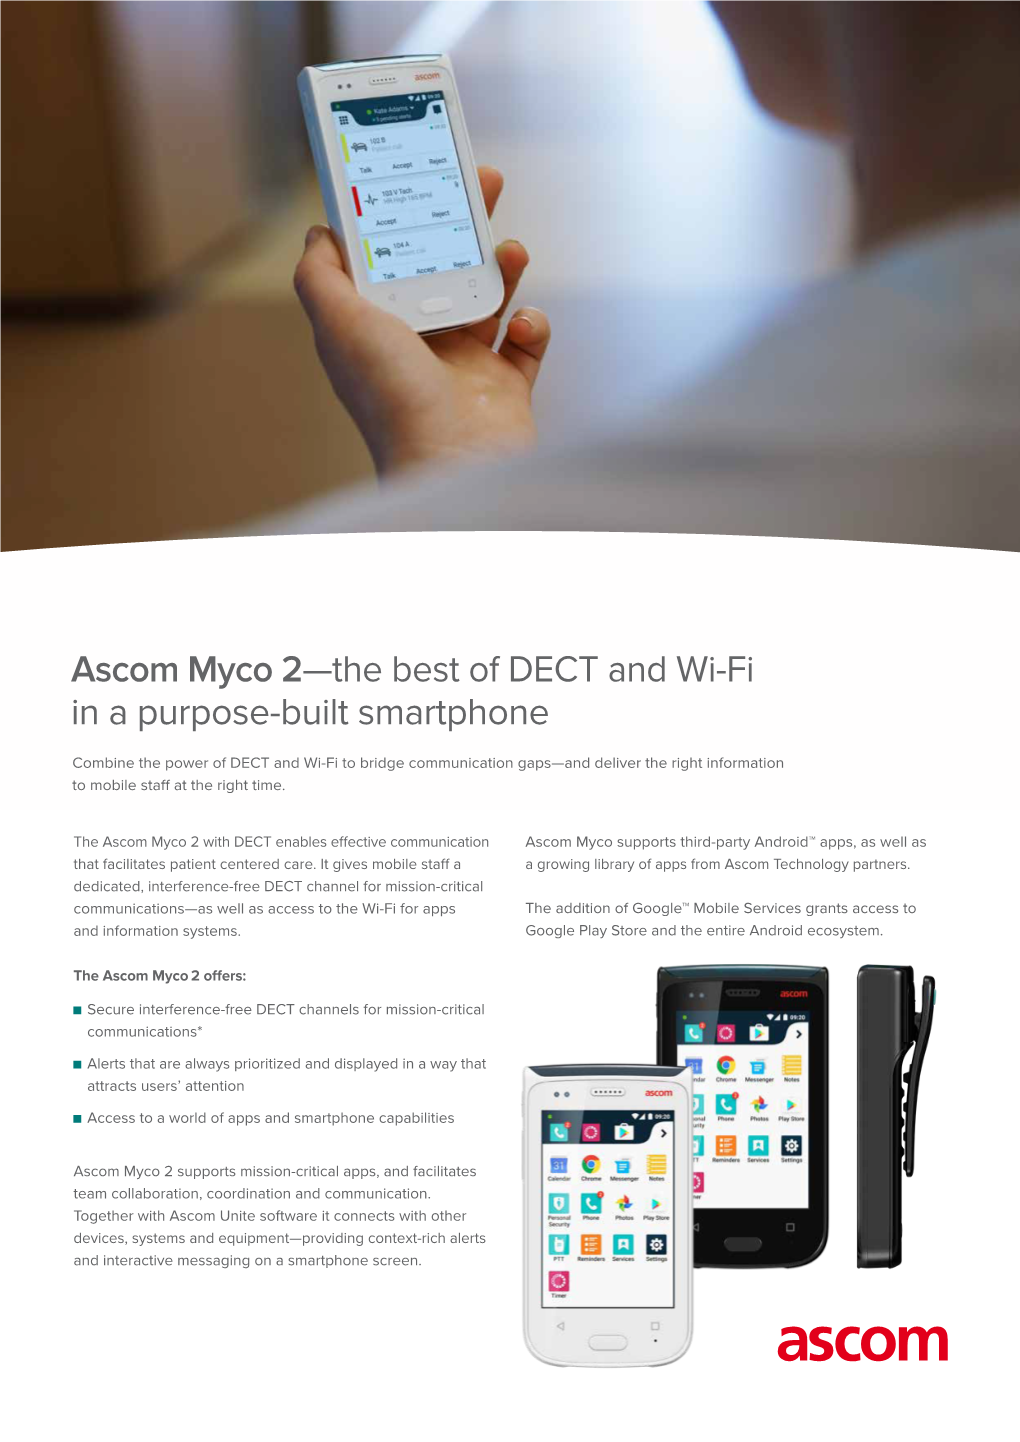 Ascom Myco 2—The Best of DECT and Wi-Fi in a Purpose-Built Smartphone